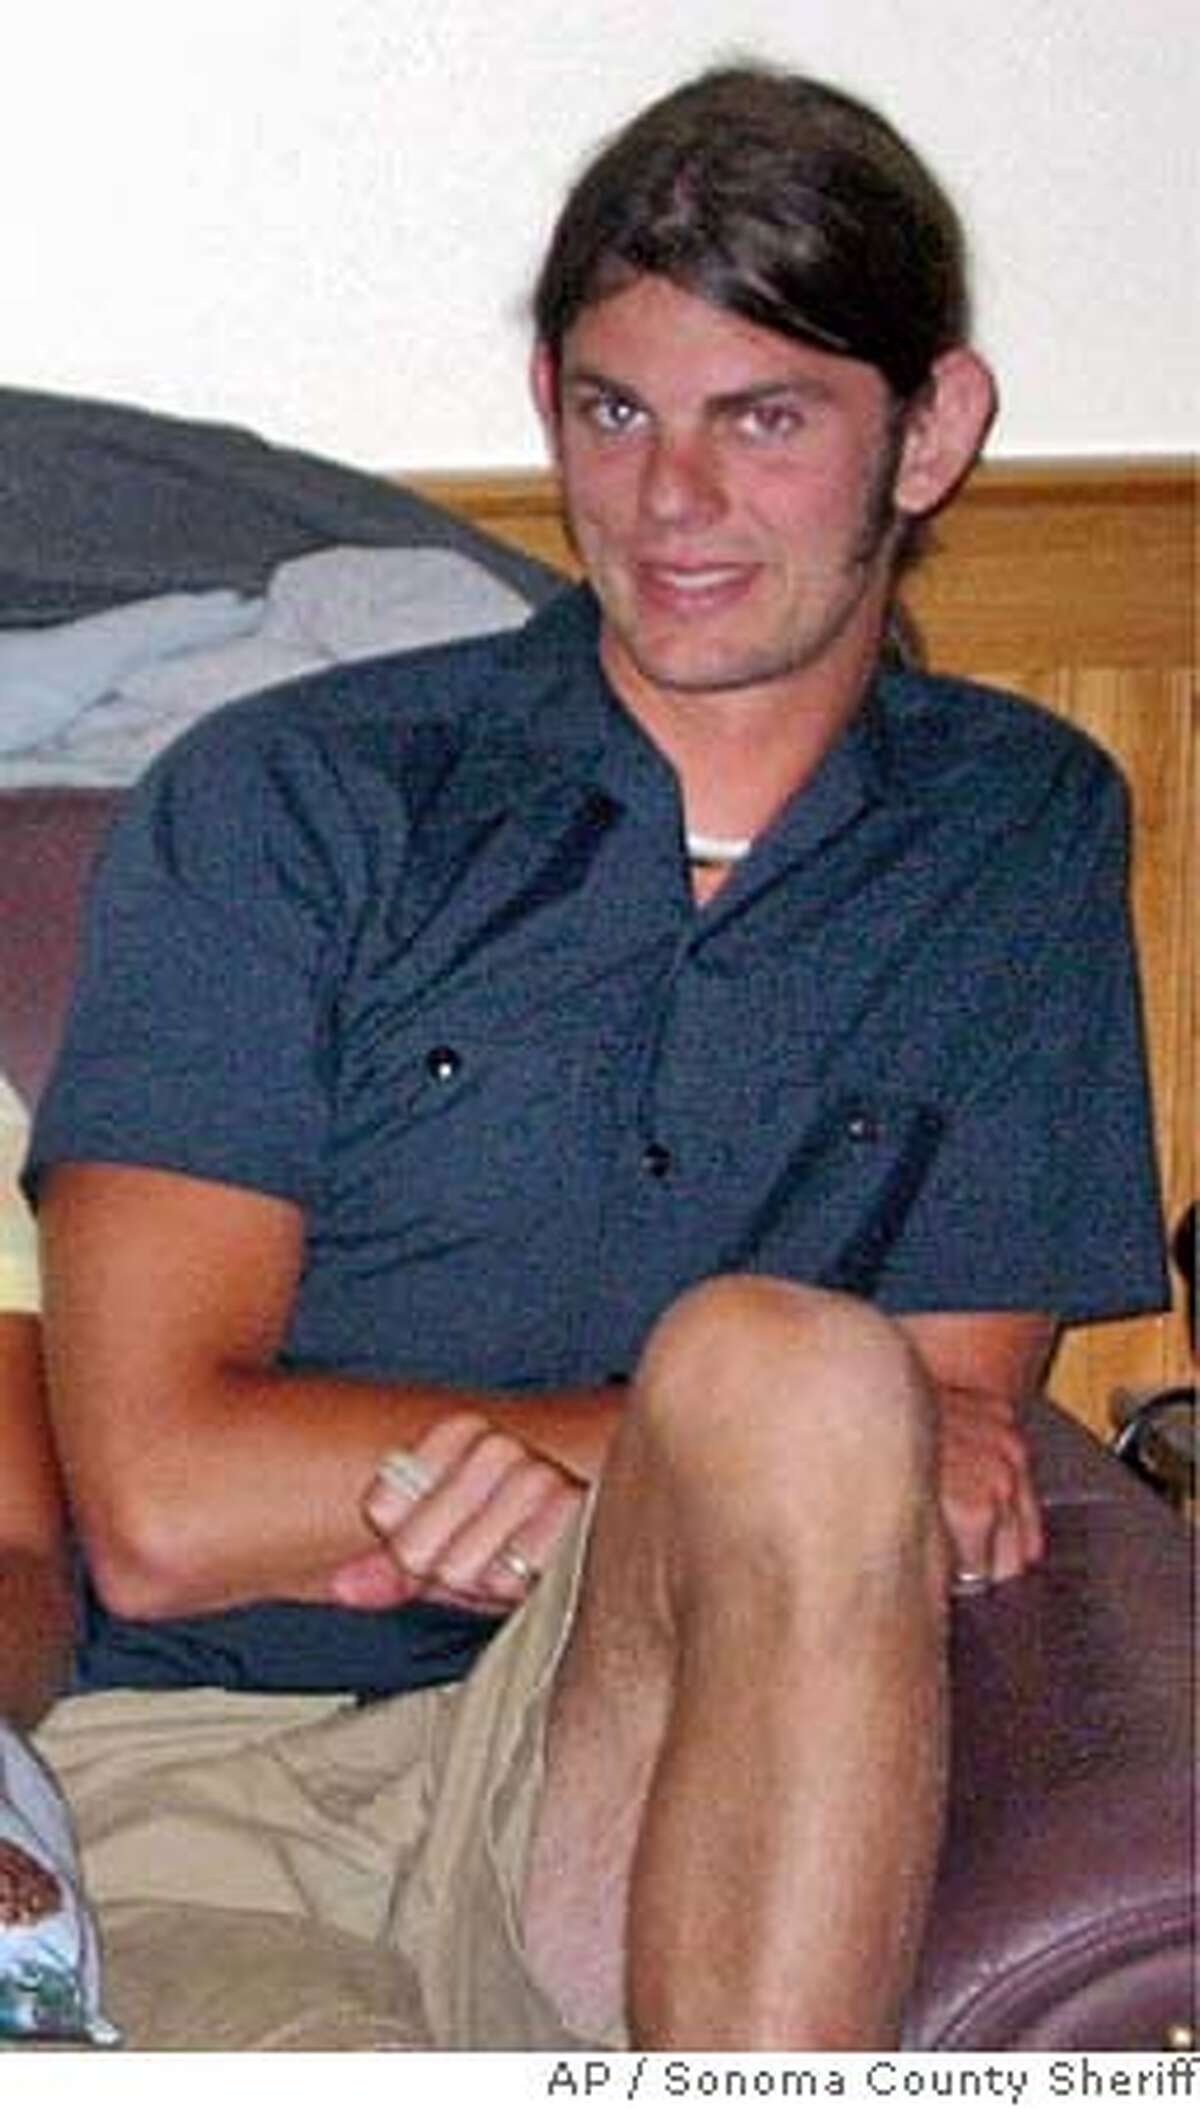 ** FILE ** Jason Allen is shown in this undated file photo. Two camp counselors who were reported missing earlier this week were murdered in their sleep on a Sonoma County beach less than a month before their wedding, authorities said. The bodies of Lindsay Cutshall, 23, and Jason Allen, 26,were discovered in sleeping bags about three miles north of Jenner on Wednesday afternoon, Aug. 18, 2004, when sheriff's deputies were rescuing a stranded hiker, the Sonoma County Sheriff's Department said. (AP Photo/Sonoma County Sheriff) Ran on: 08-21-2004 Two bodies were found at Fish Head Beach in Sonoma County.